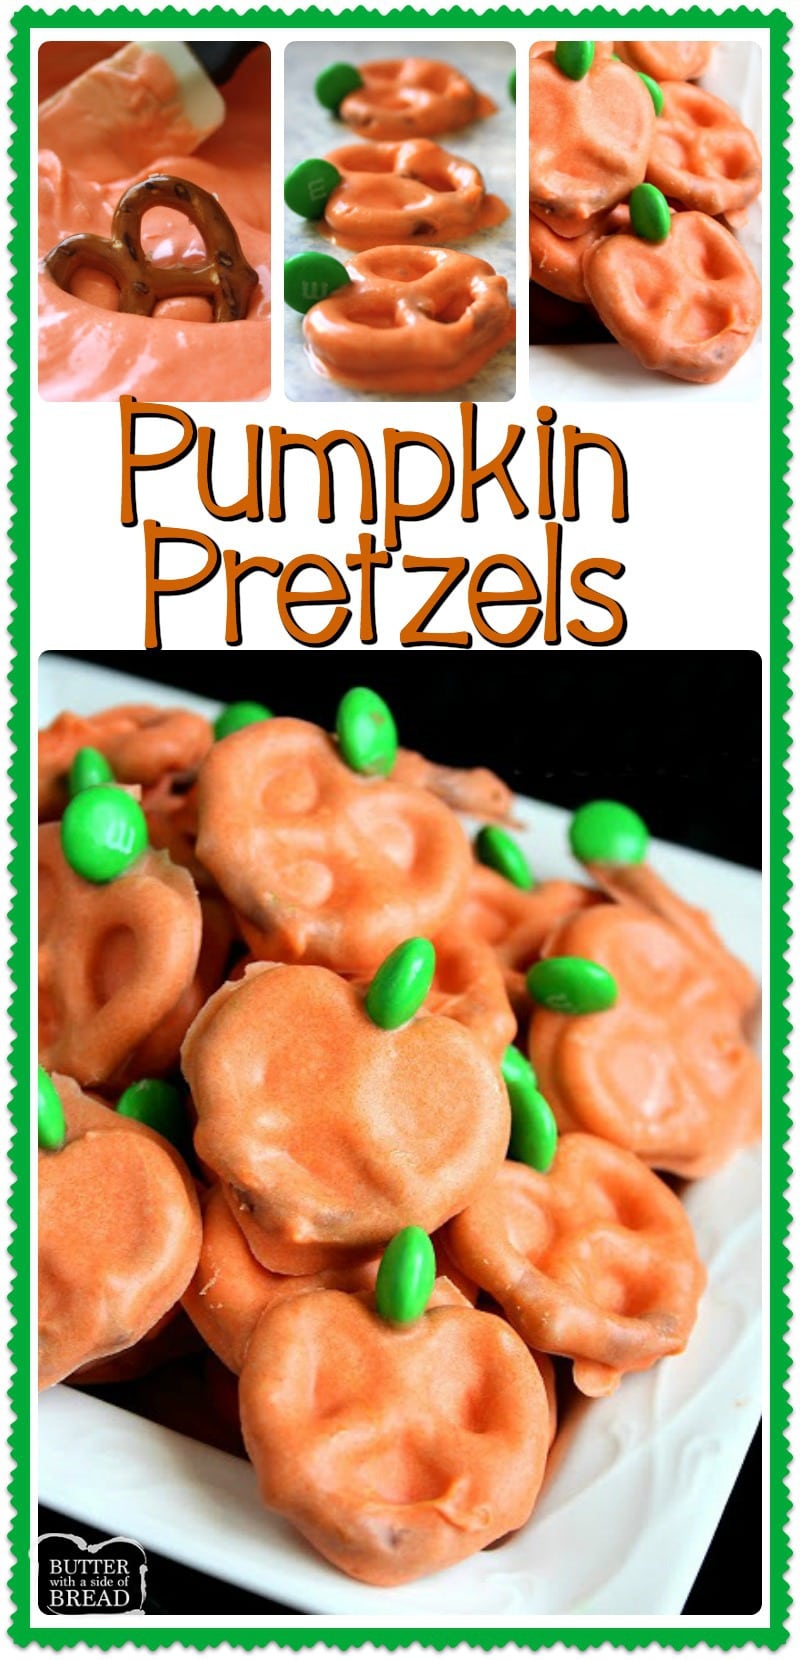 Pumpkin Pretzels are chocolate covered pretzels made with just a few ingredients & perfect for Halloween! Tips for melting chocolate & the BEST tool to use.